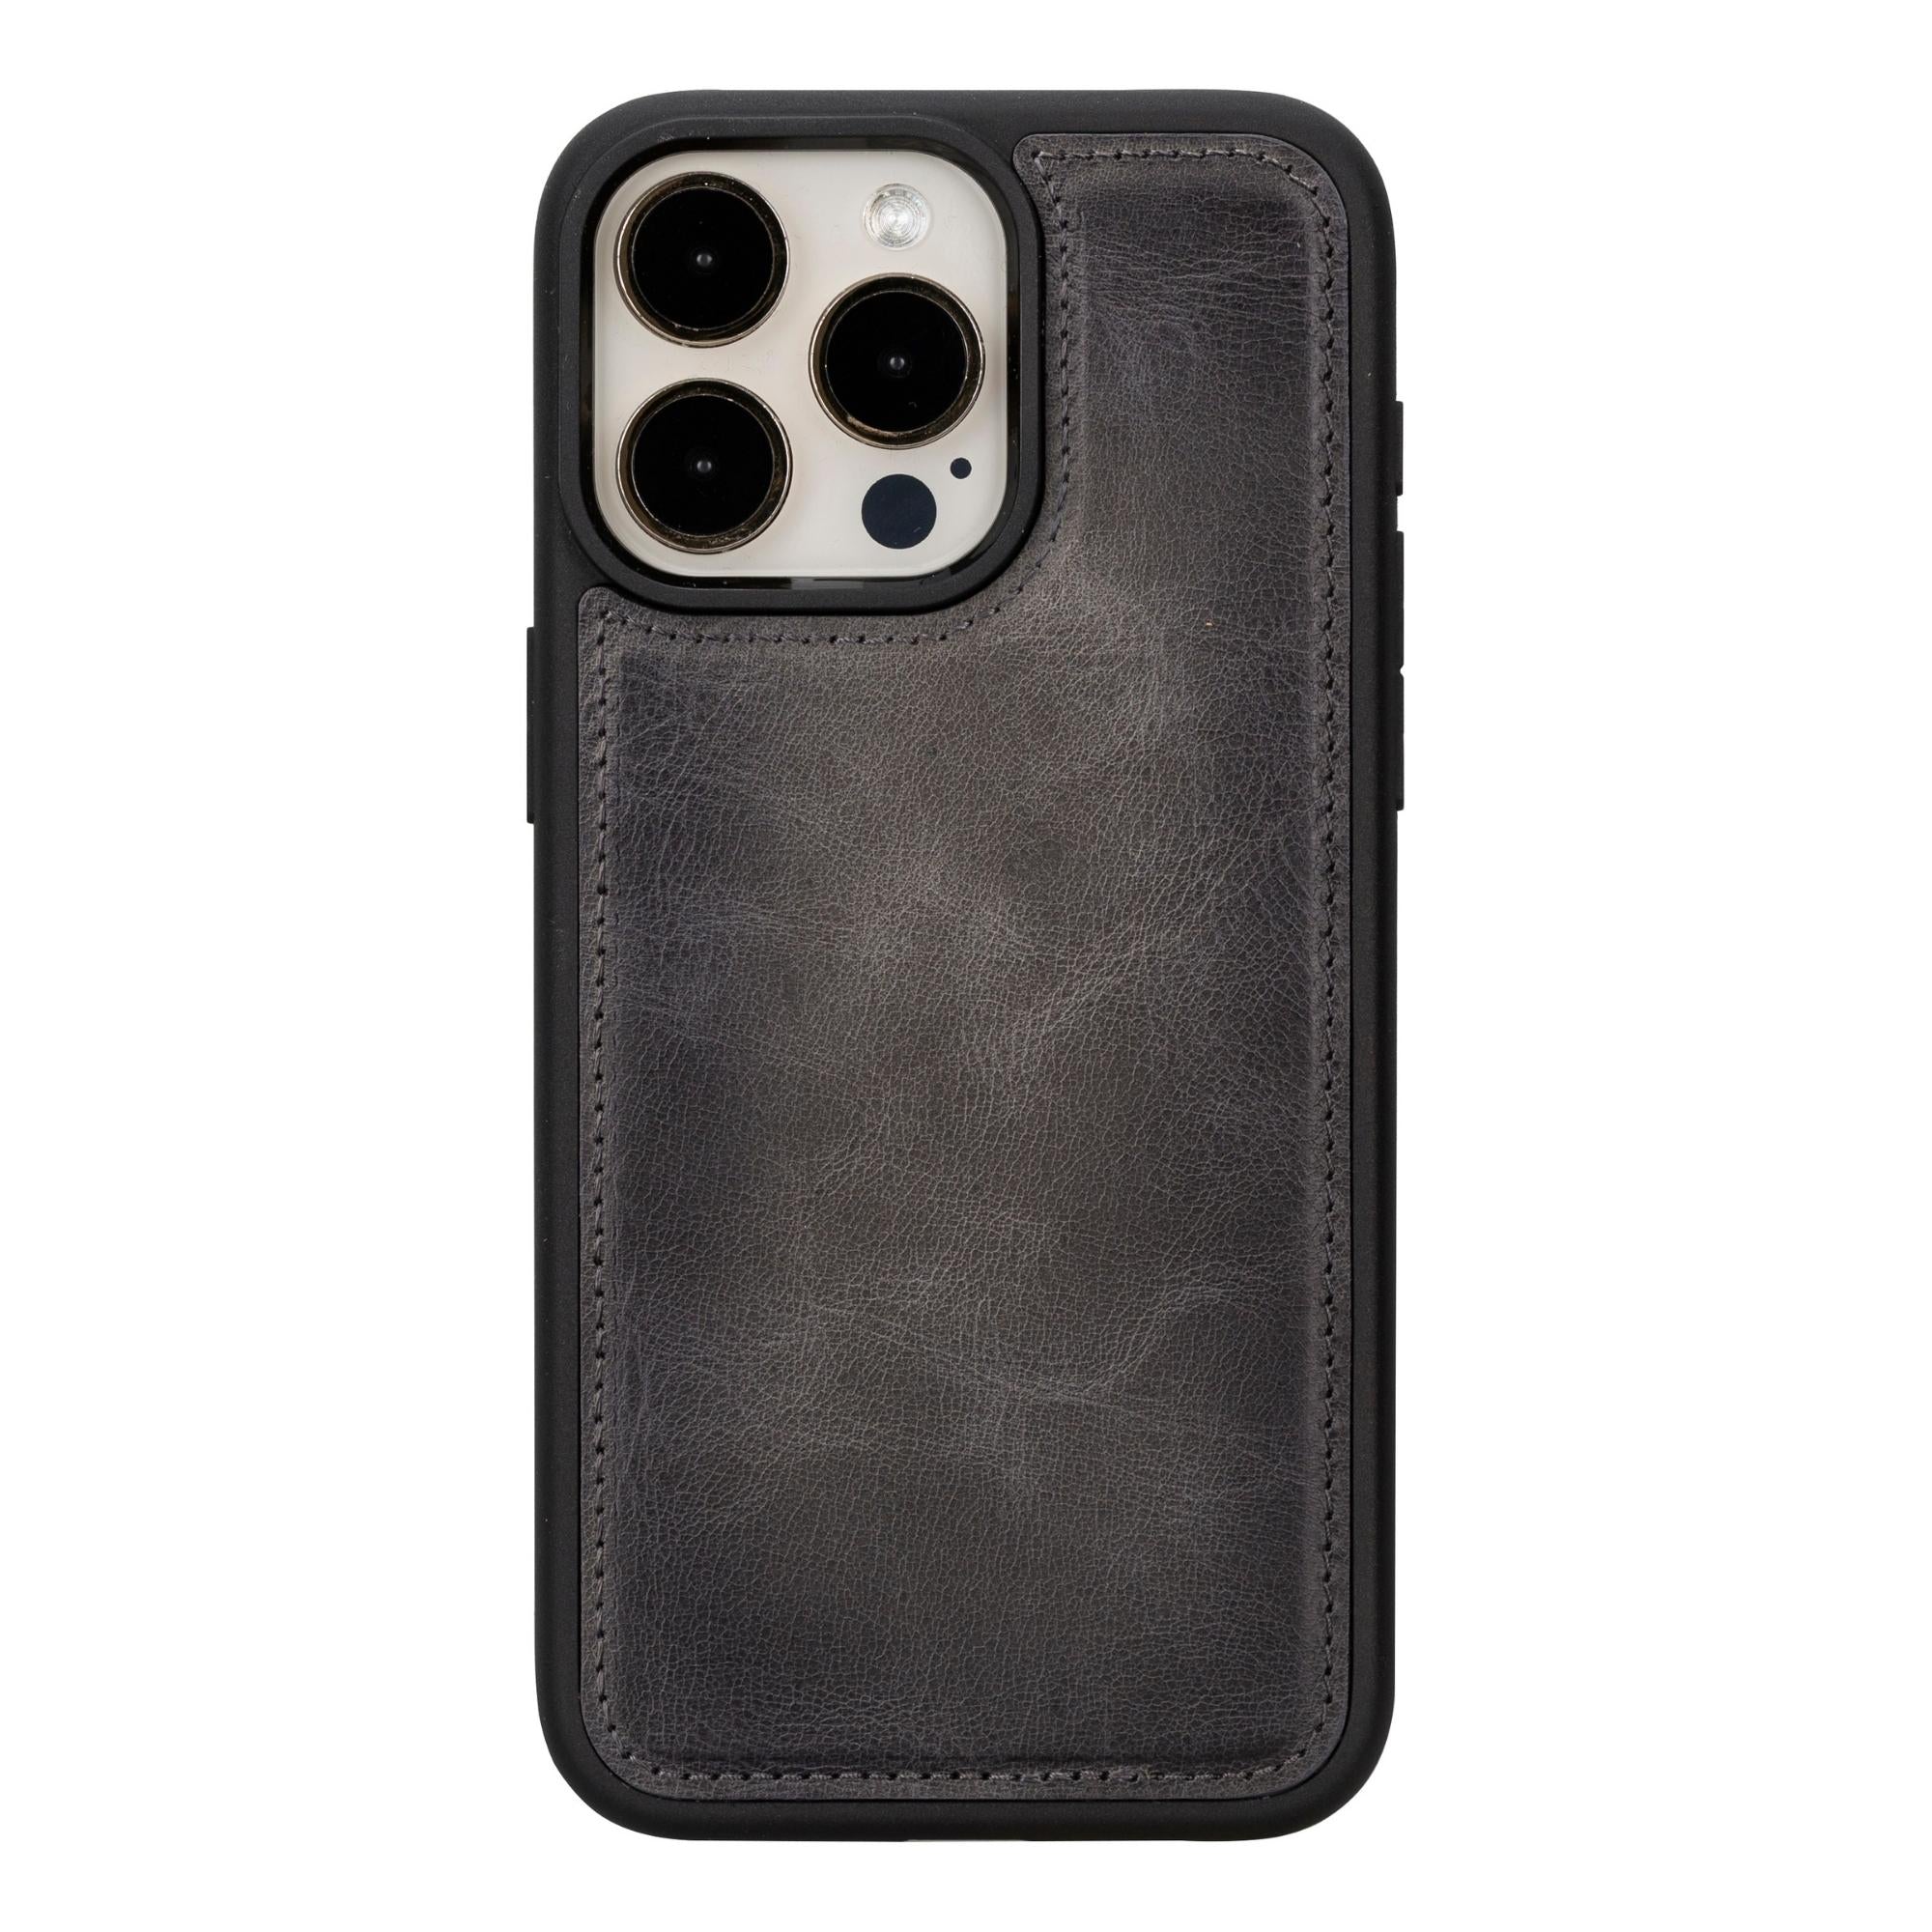 Apple iPhone Leather Cases & Covers - TORRO